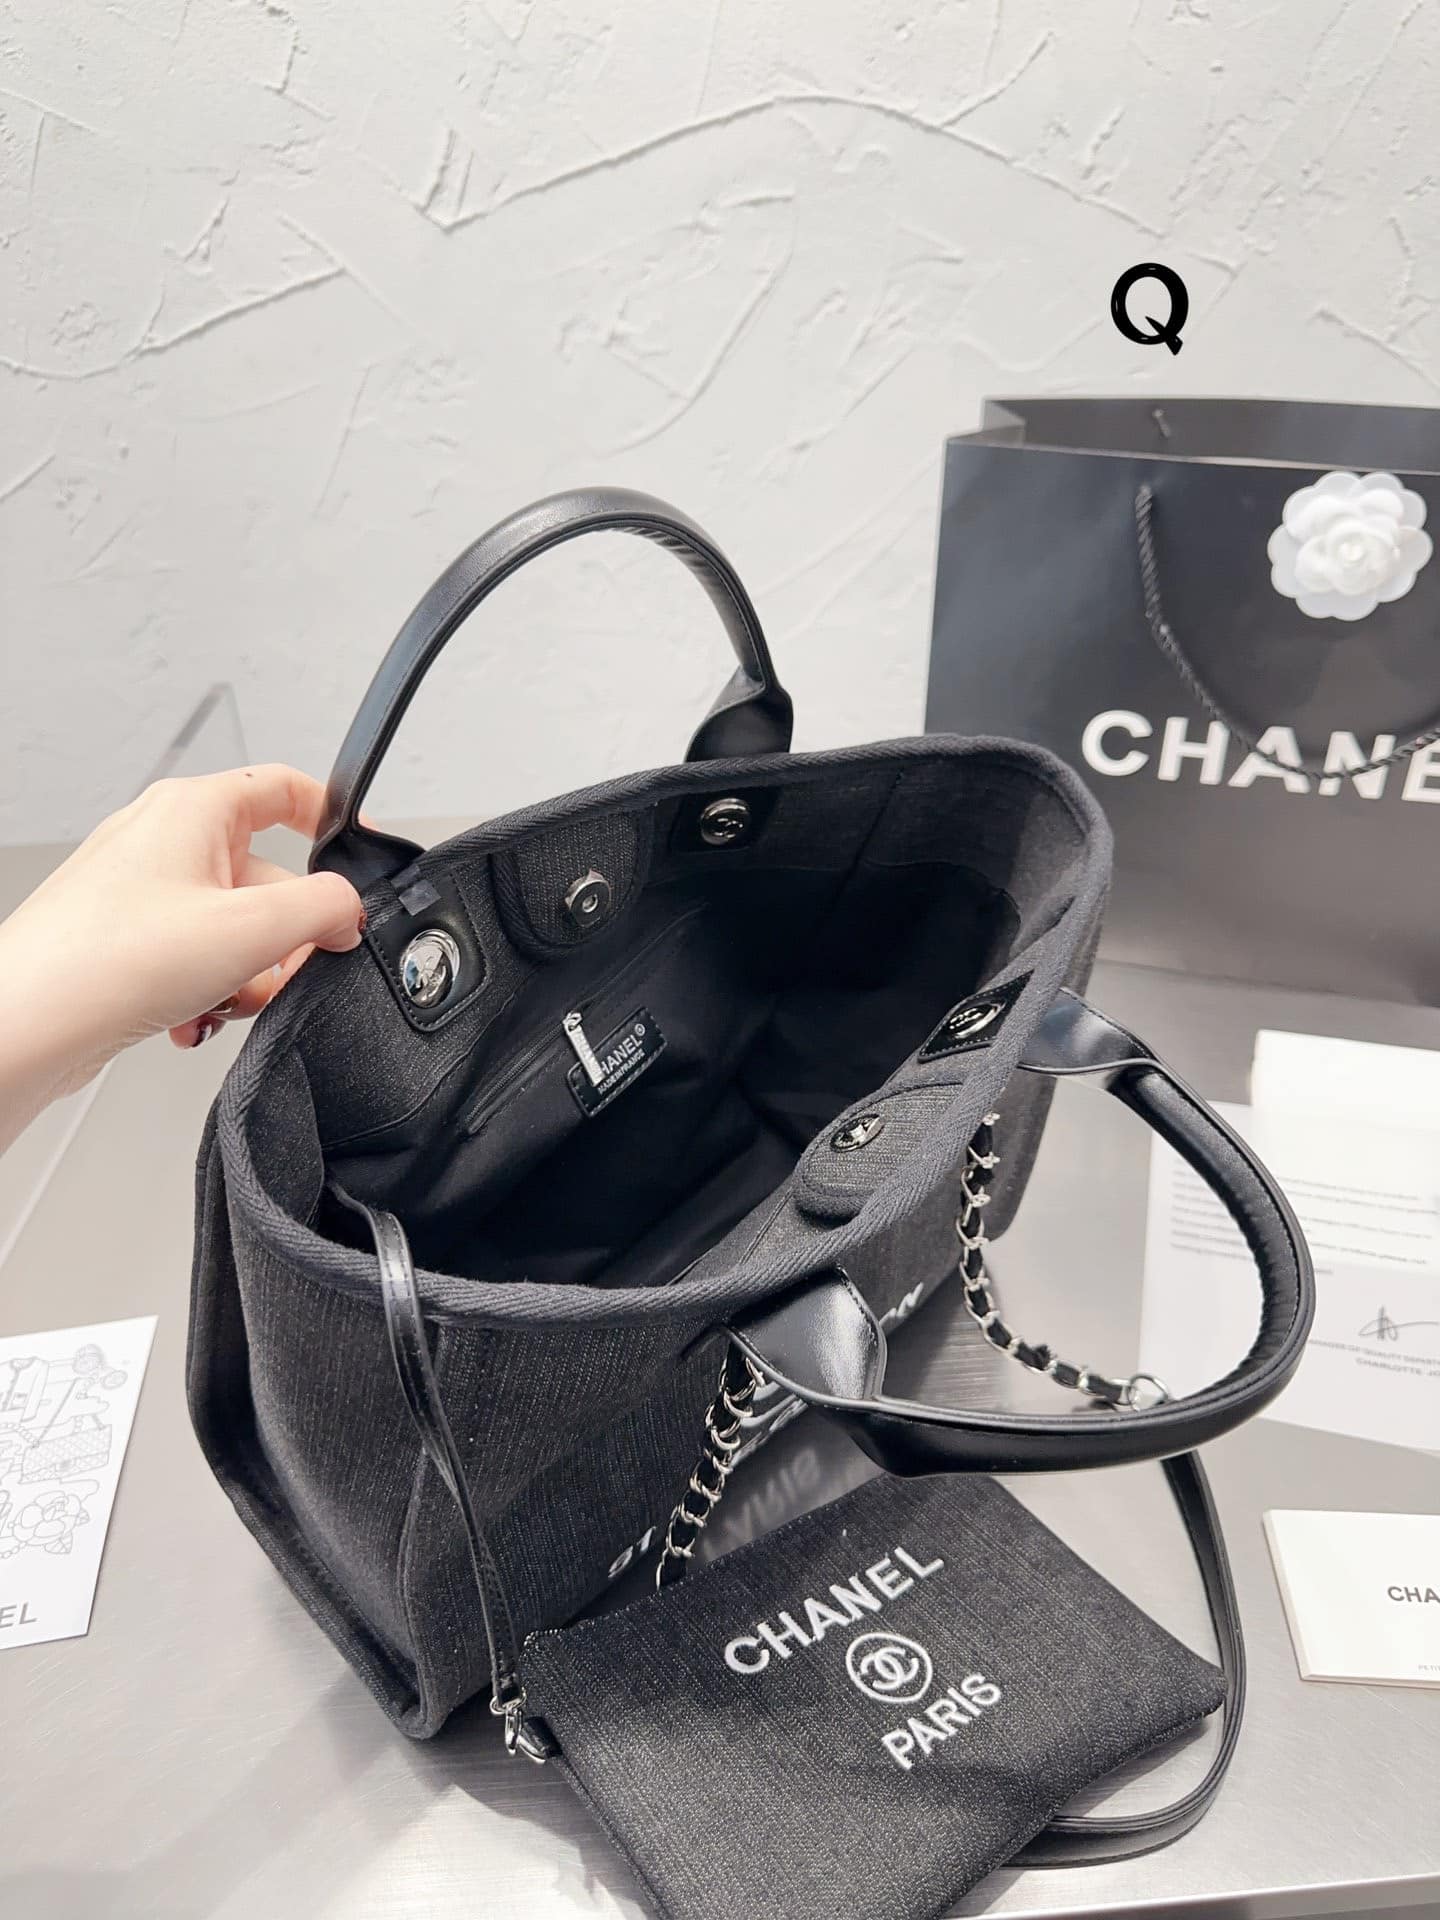 CHANEL A25169 Cambon Line Large Tote Bag Leather Black x White  eBay